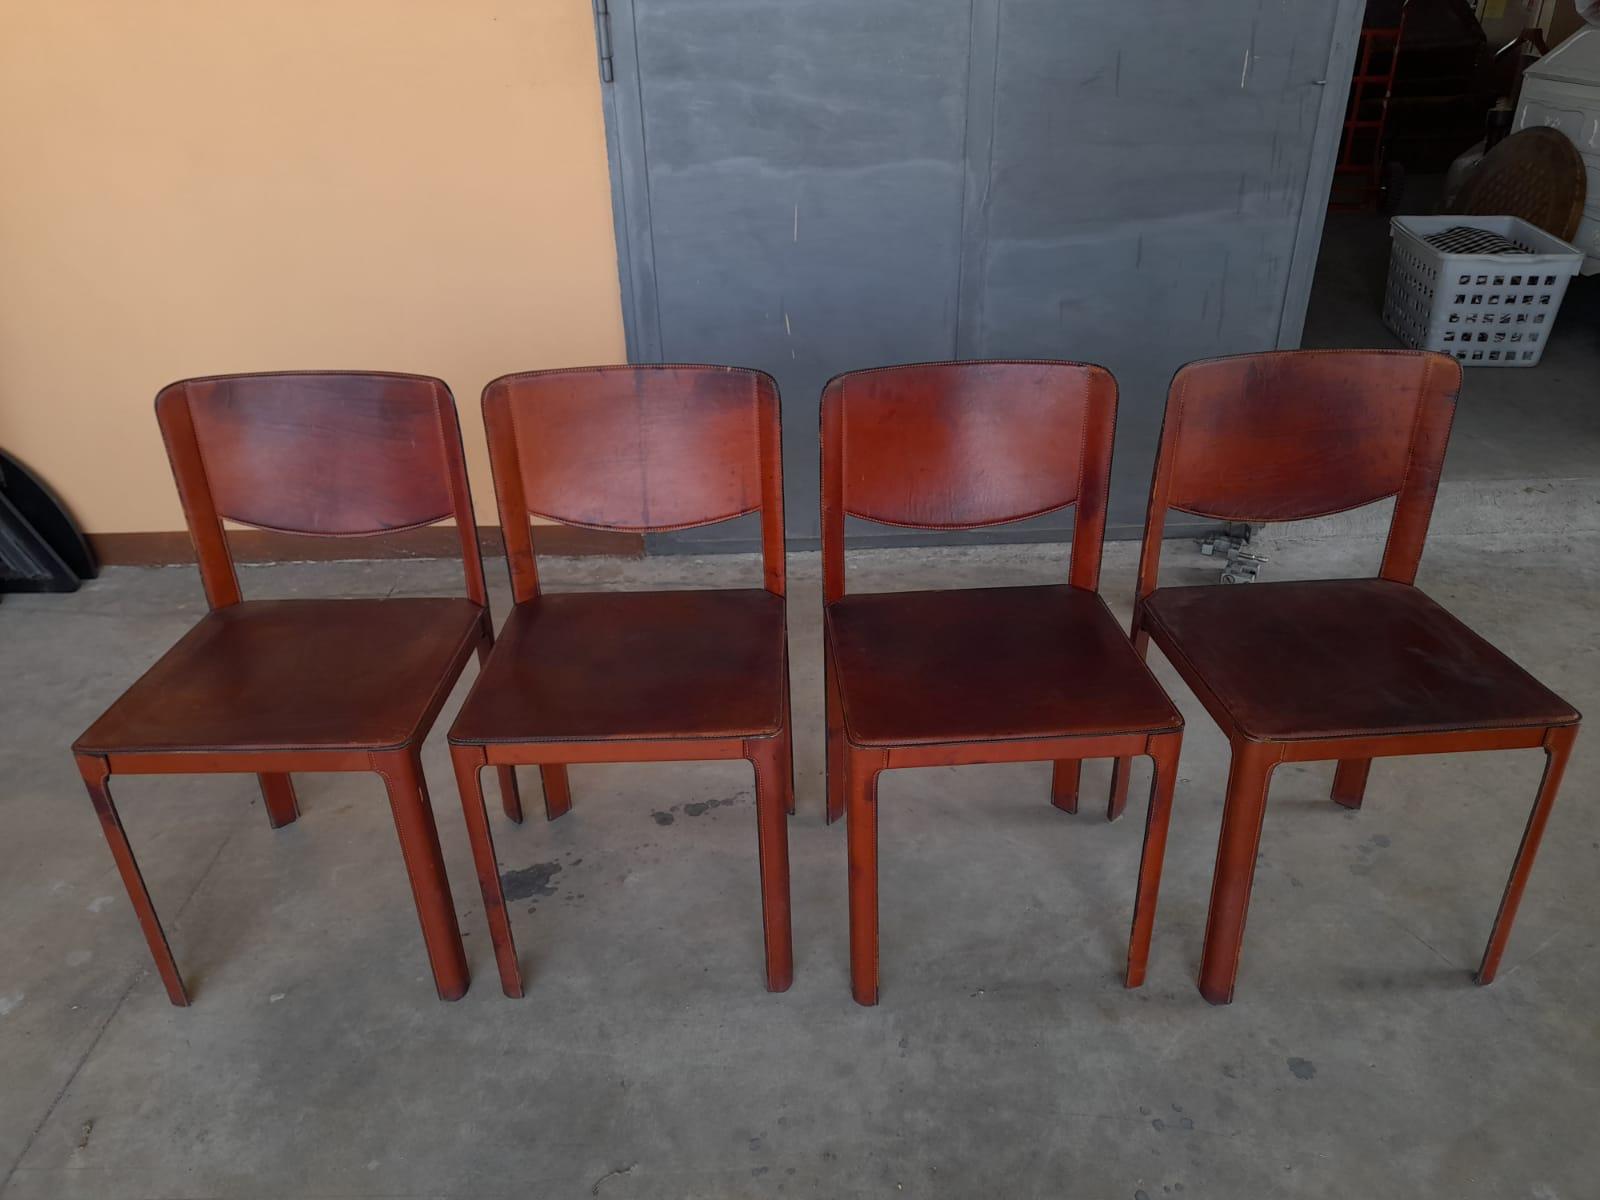 Set of four vintage chairs by Matteo Grassi, dark red leather.
From Italy form 1990s period.
Shows light scratches and wear from previous use but remains in fair condition. No structural damages. 
Size of each chair: 45 x 45 x h 81 cm, seat high